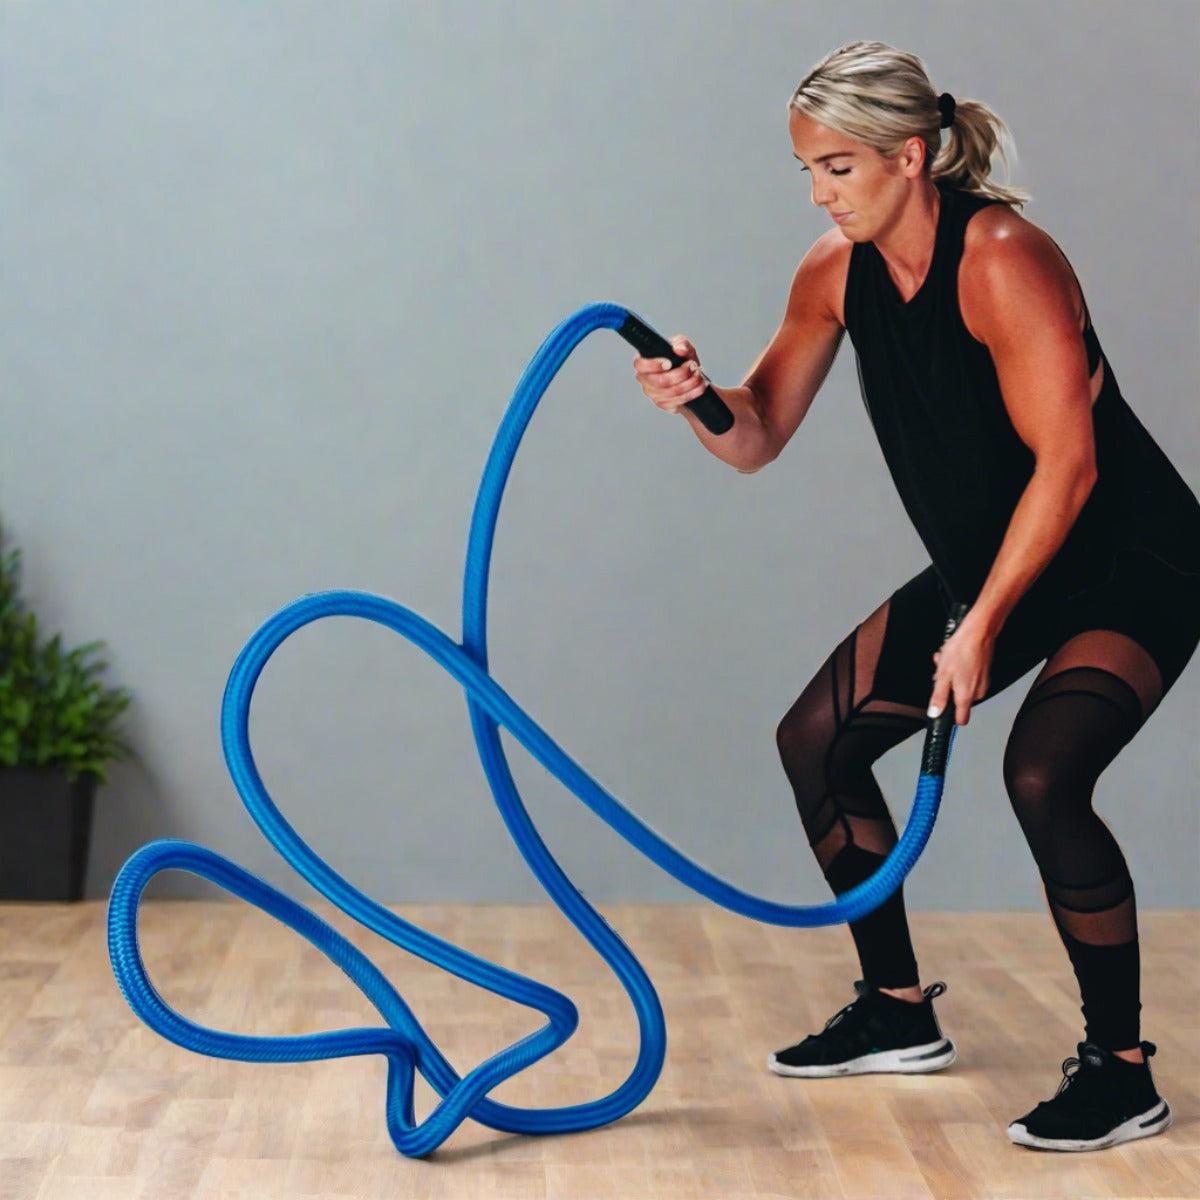 Action photo of woman doing unanchored battle rope waves in 6 feet of space